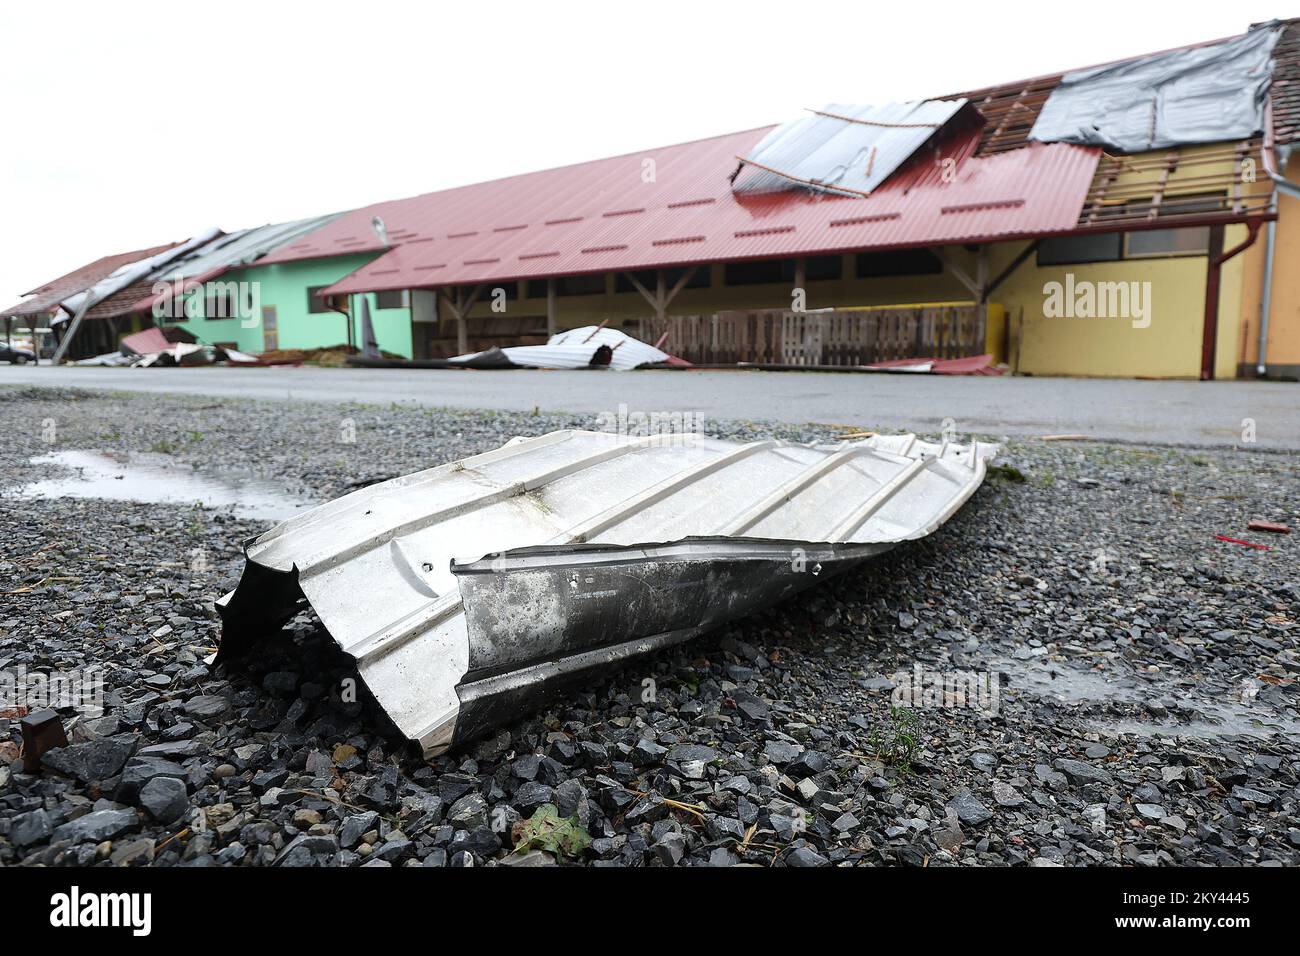 Destroyed roof of the Husar Equestrian Club, in Cazma, Croatia, on September 16, 2022.A powerful thunderstorm brought torrential rain and extreme wind gusts to the Cazma area on yesterday afternoon.The storm ripped through roofs, uprooted trees, and tipped over vehicles Photo: Goran Stanzl/PIXSELL  Stock Photo